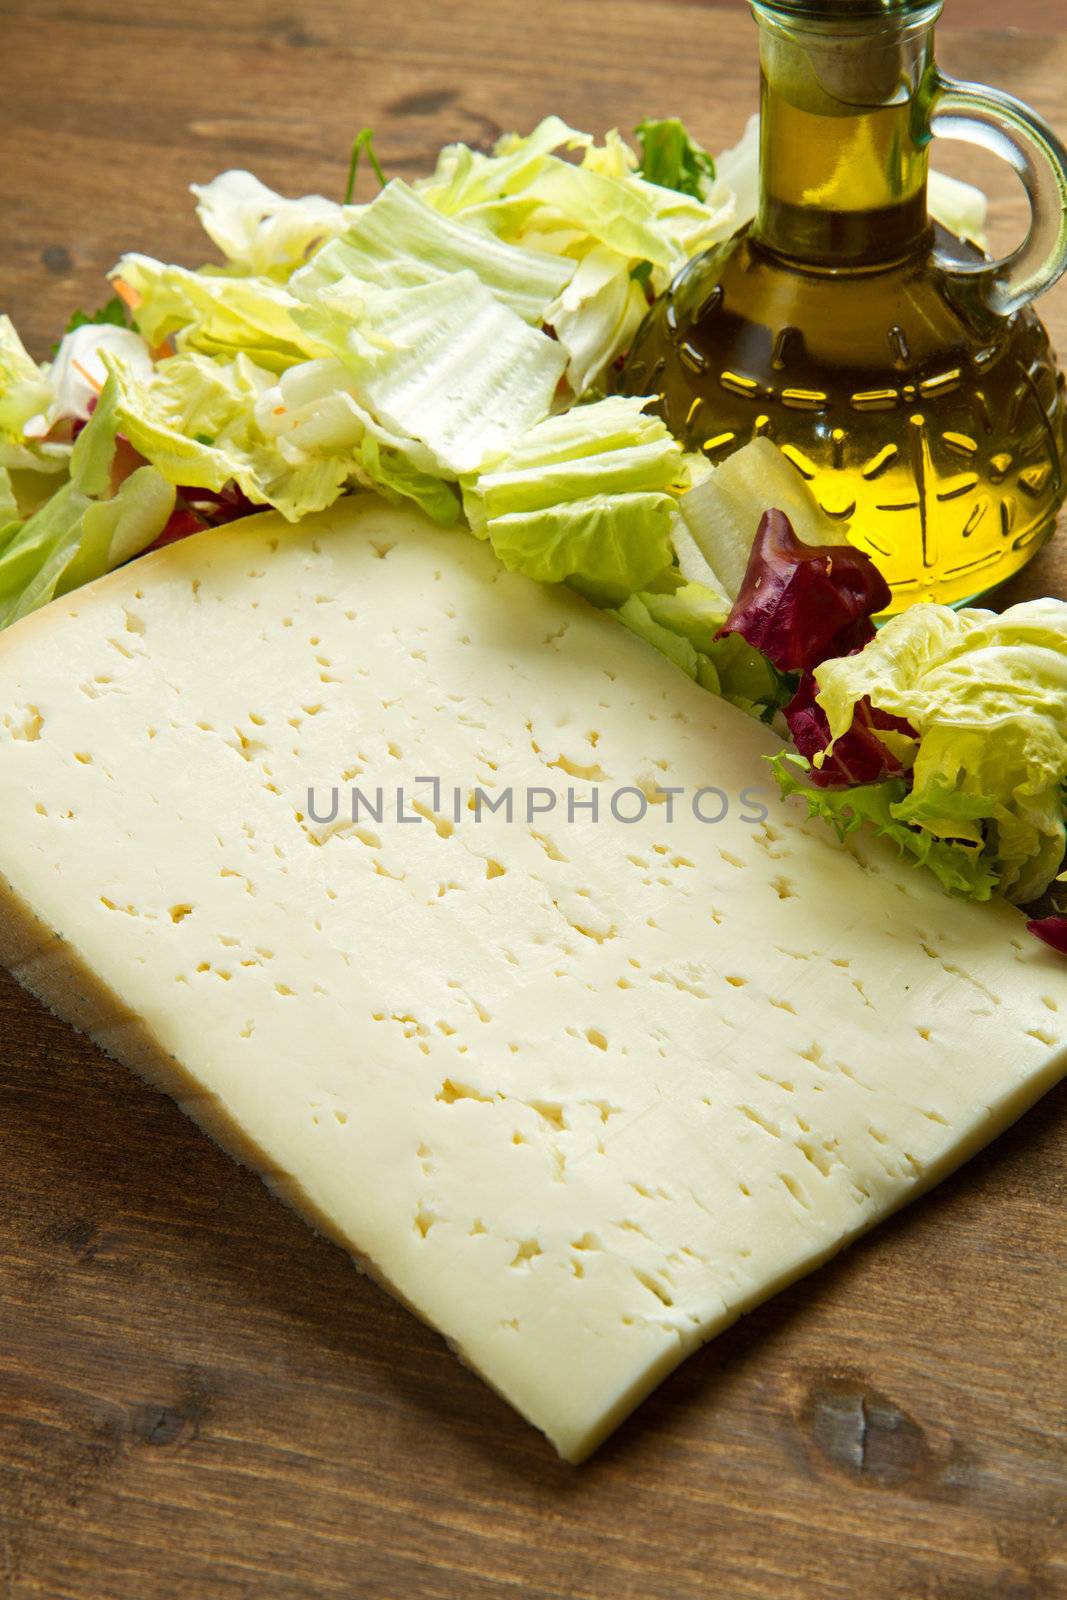 Asiago cheese with fresh salad on wooden table